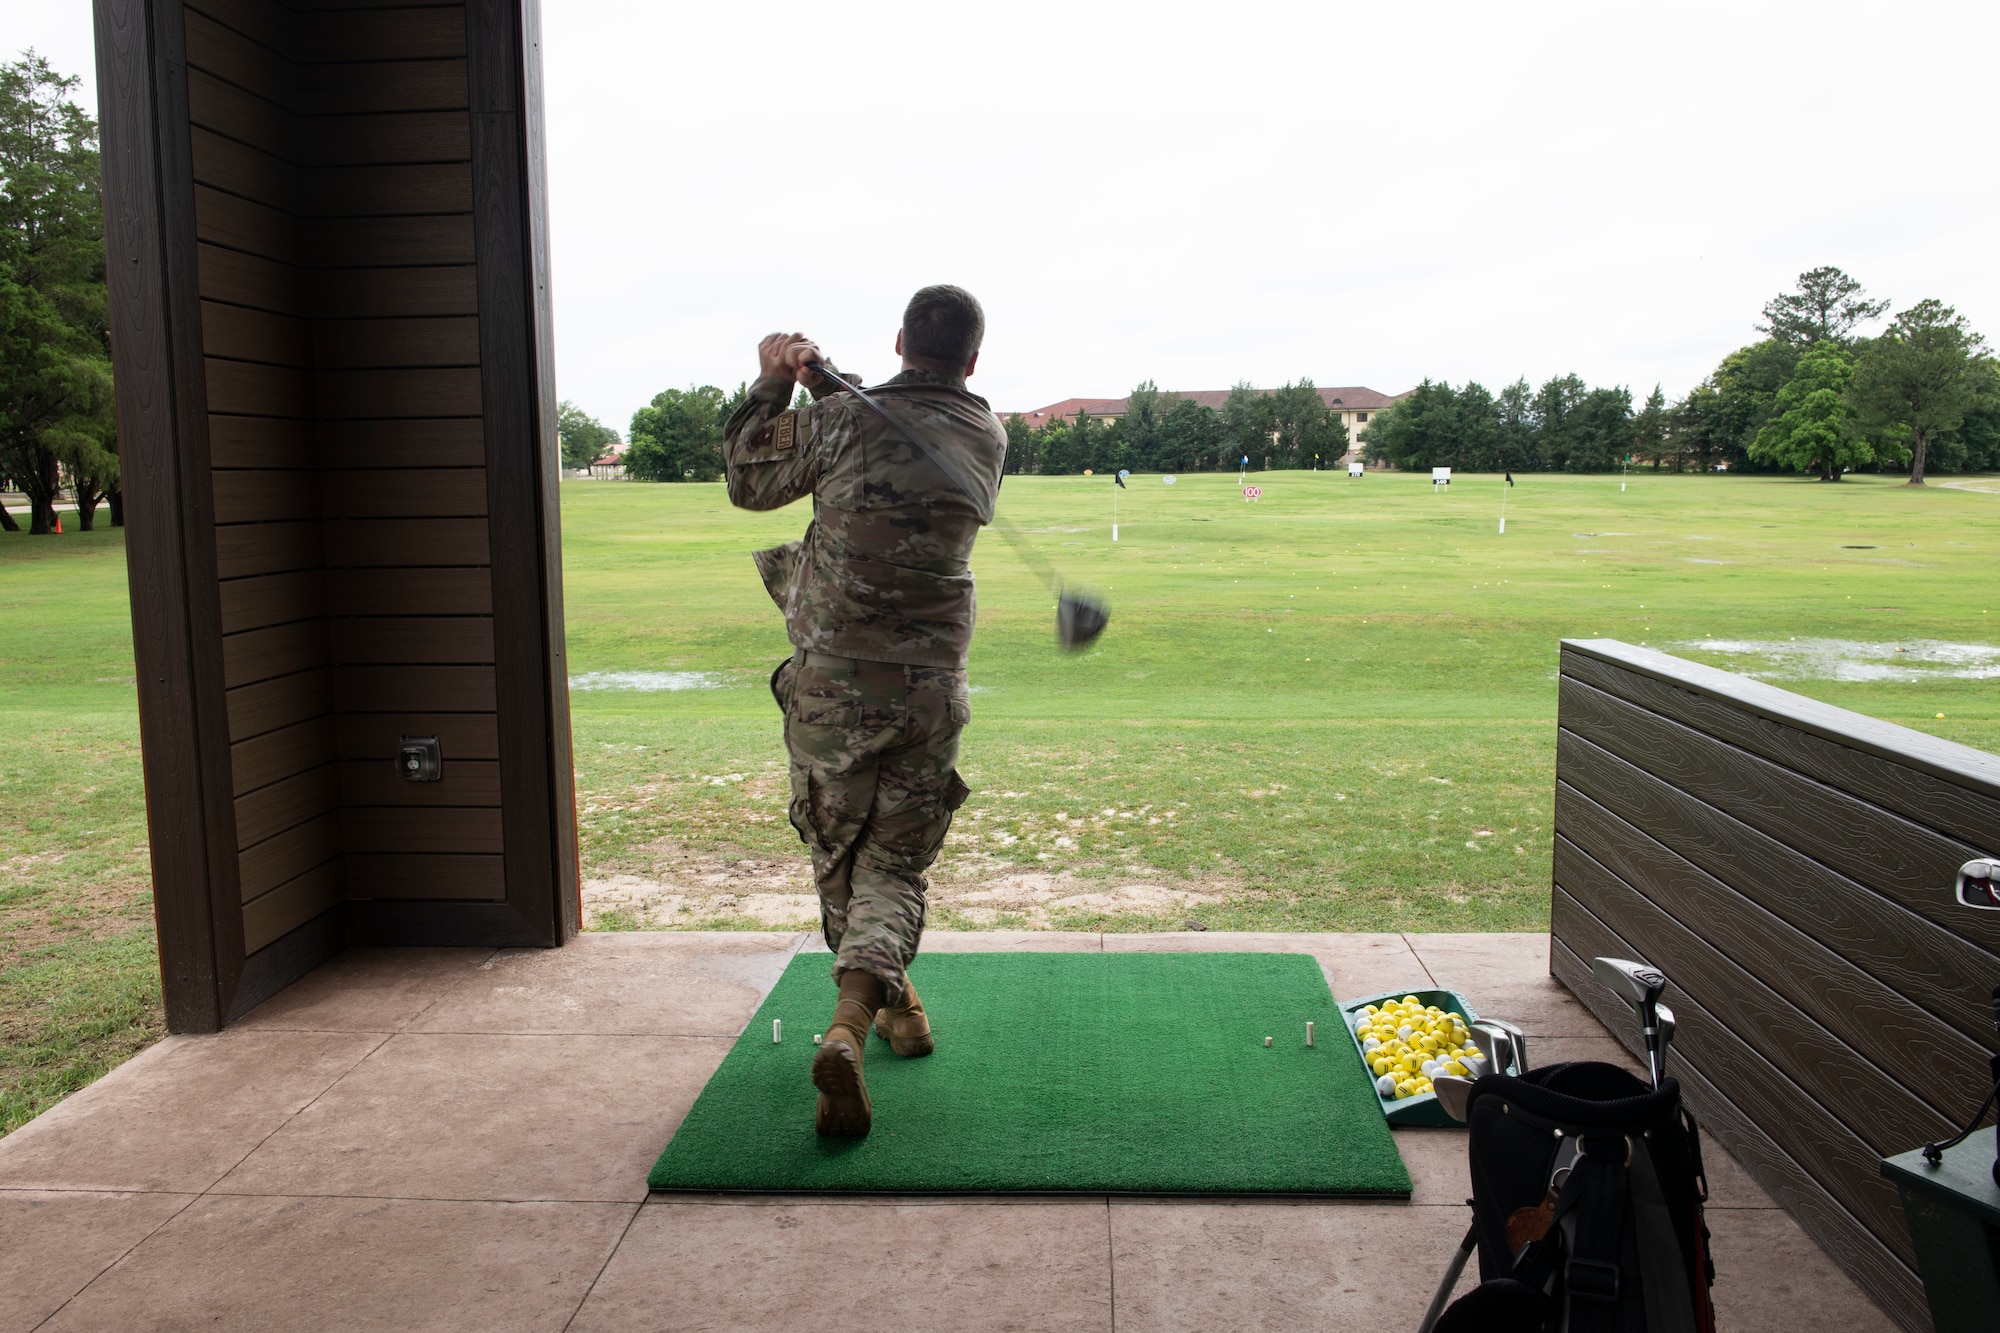 The driving range has modernized the golfing experience through Toptracer technology that will provide six globally connected bays with a wide variety of games for Airmen, Guardians, and families. (Courtesy photo)